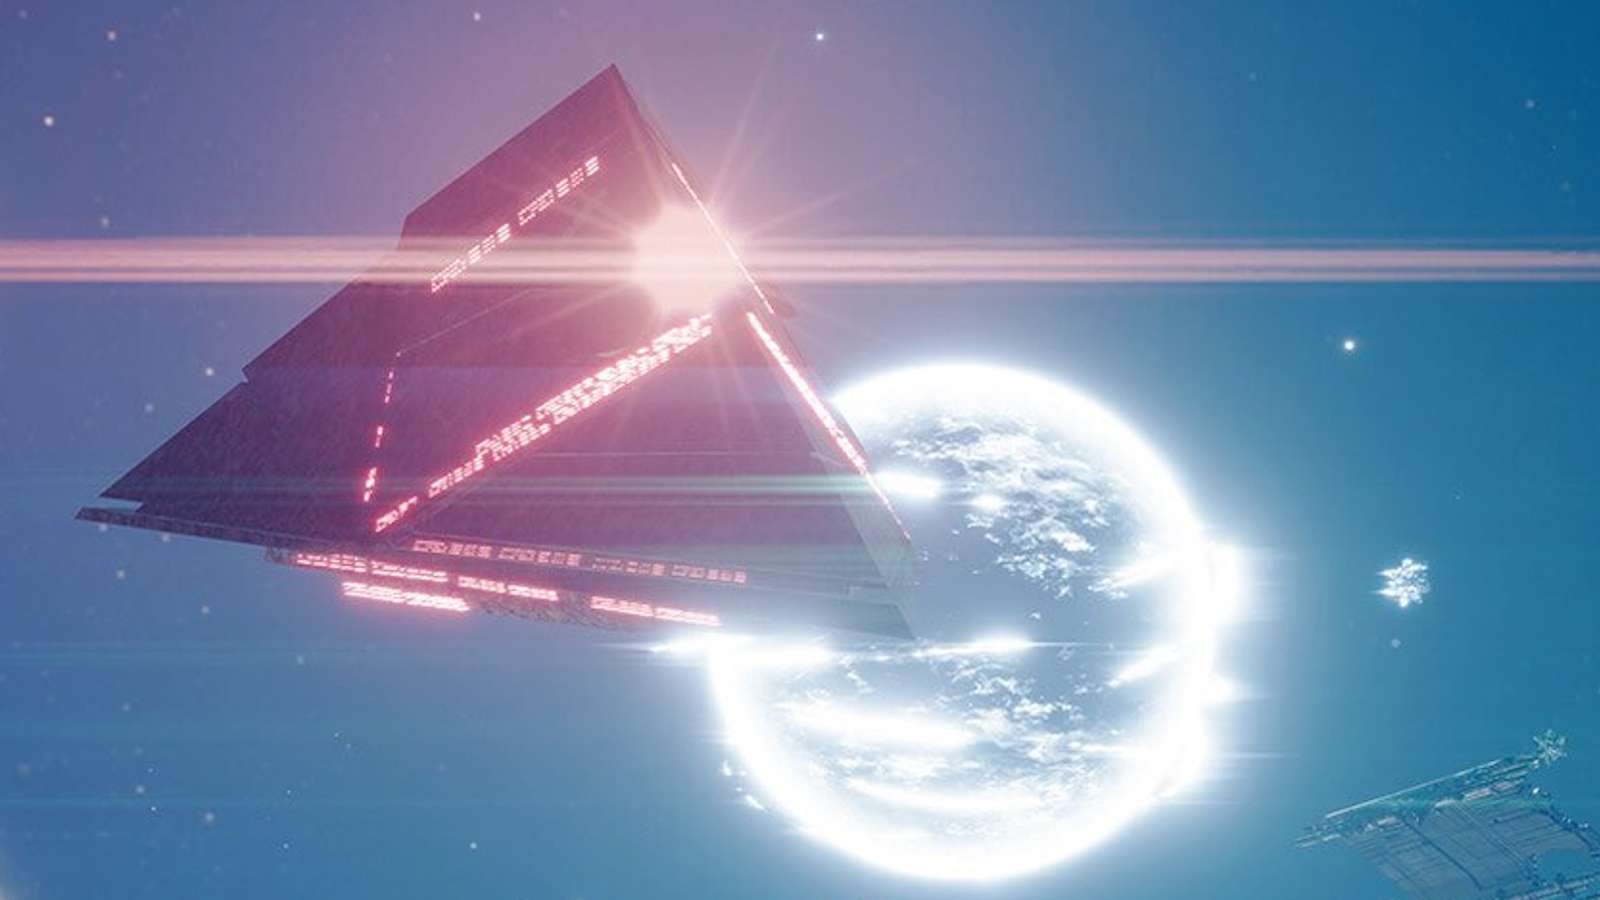 Void Crew Pyramid Ship that Destiny 2 players believe looks too similar.